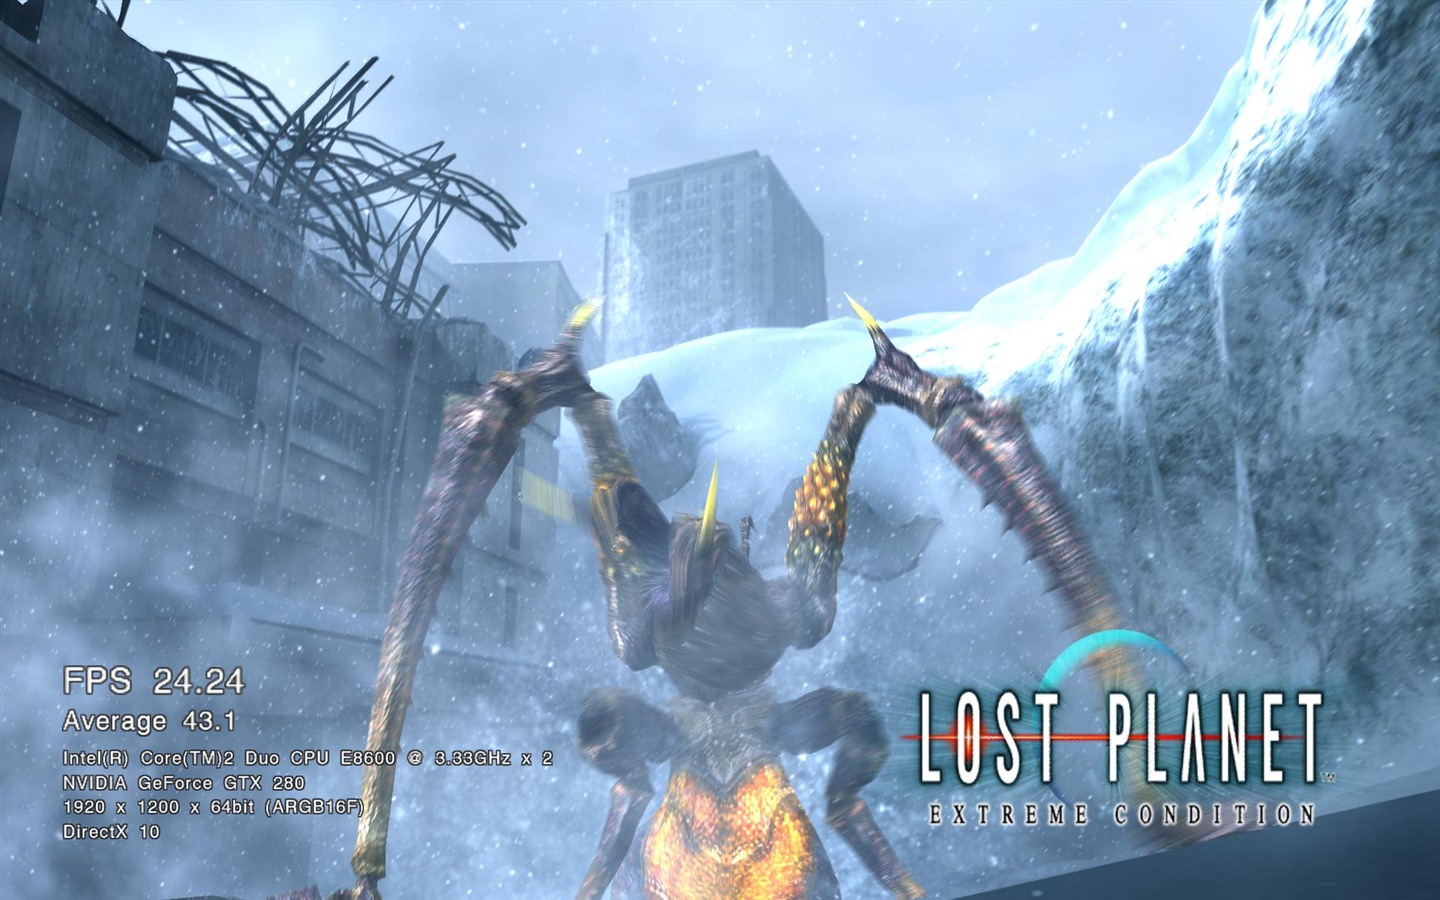 Lost Planet: Extreme Condition HD tapety na plochu #11 - 1440x900